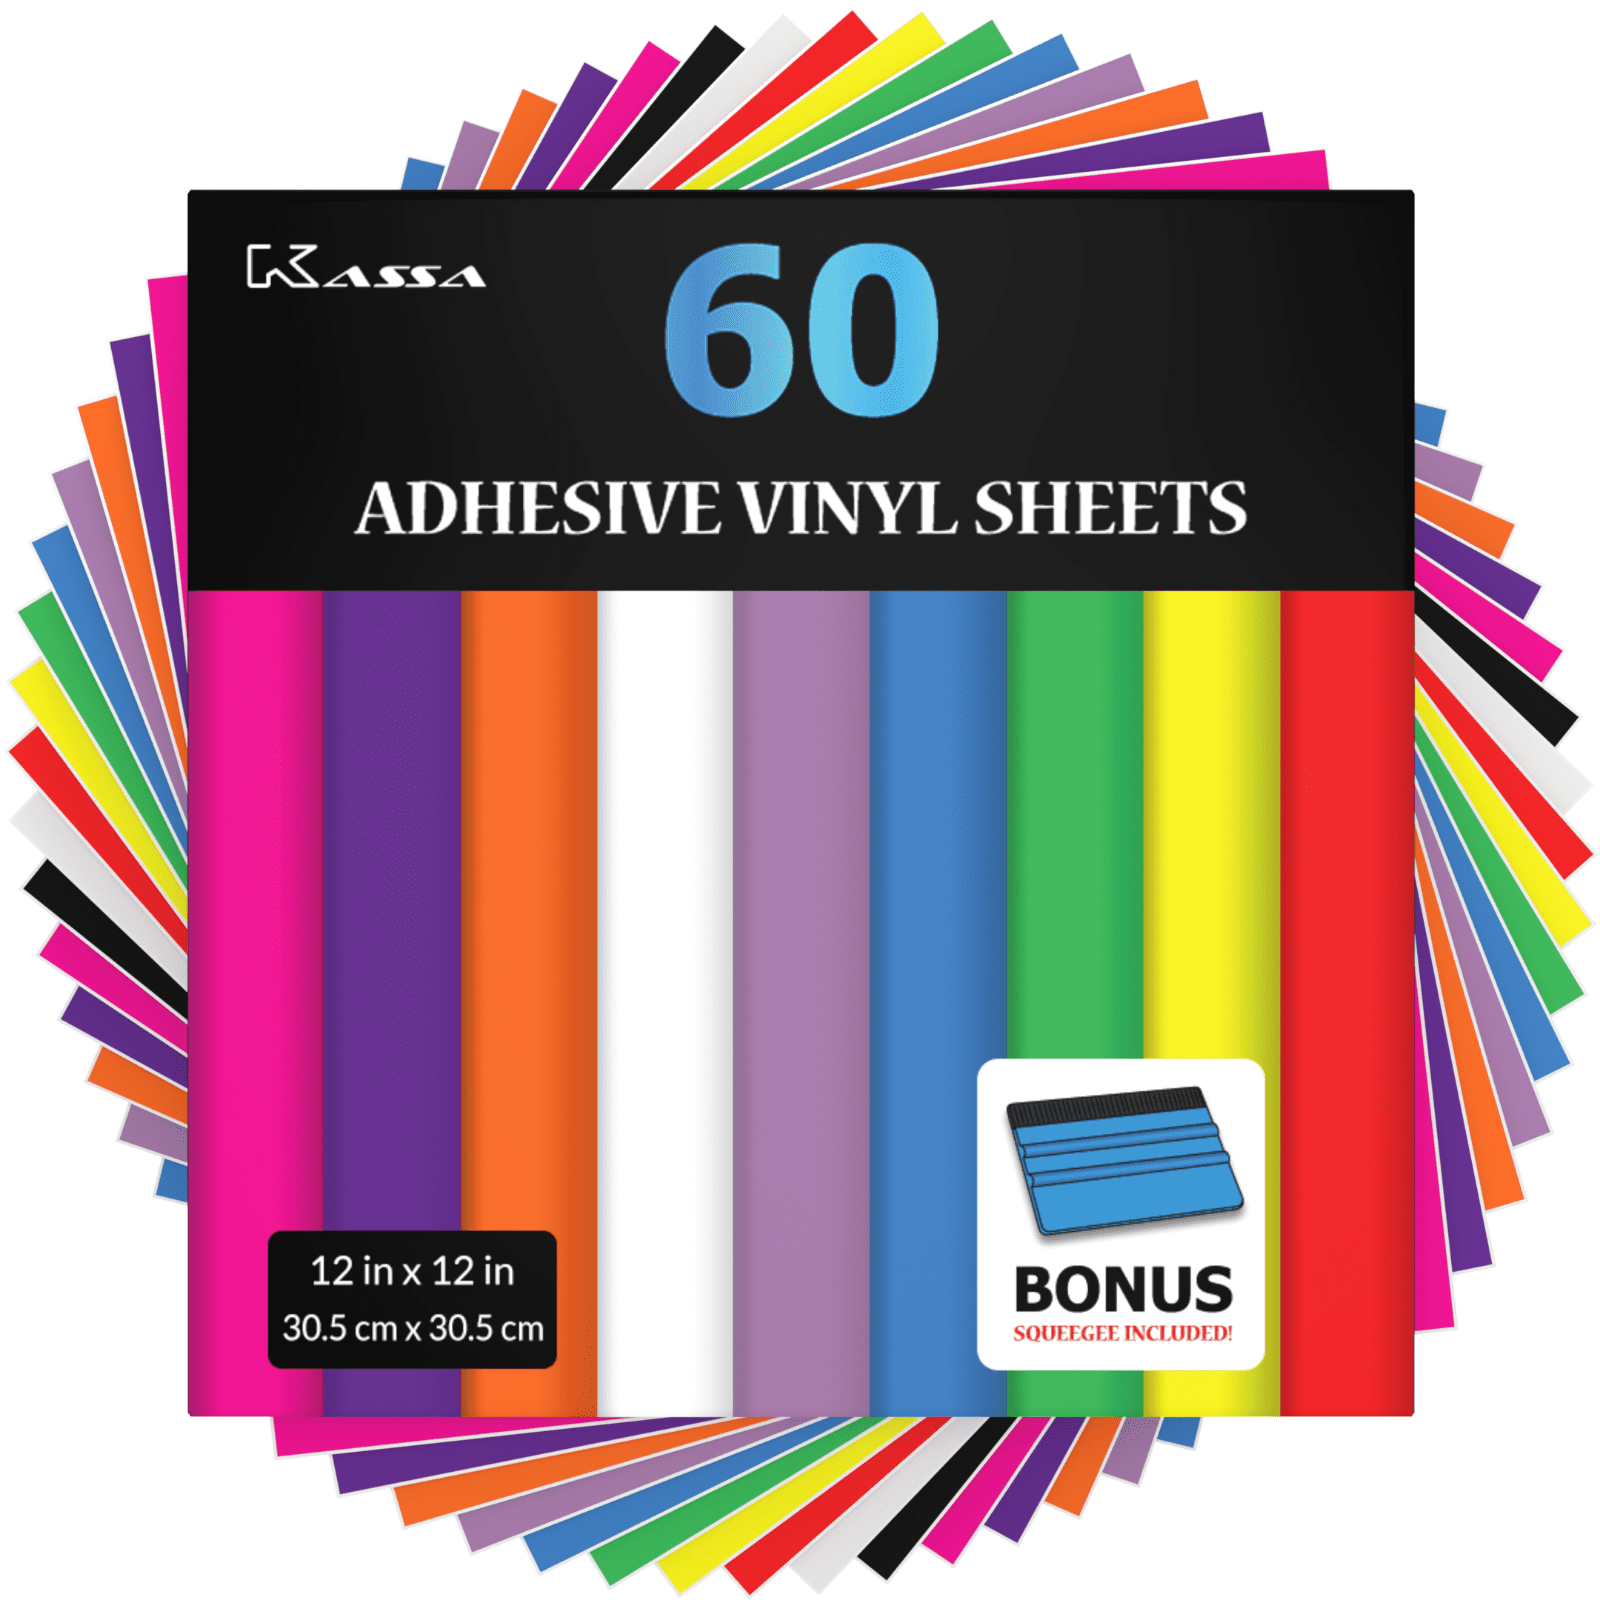 for Indoor & Outdoor Projects Waterproof and Easy to Weed & Cut ARTEZA Self Adhesive Vinyl Sheets 12x12 Compatible with Cricut & Other Craft Cutters Pack of 42 Assorted Colors